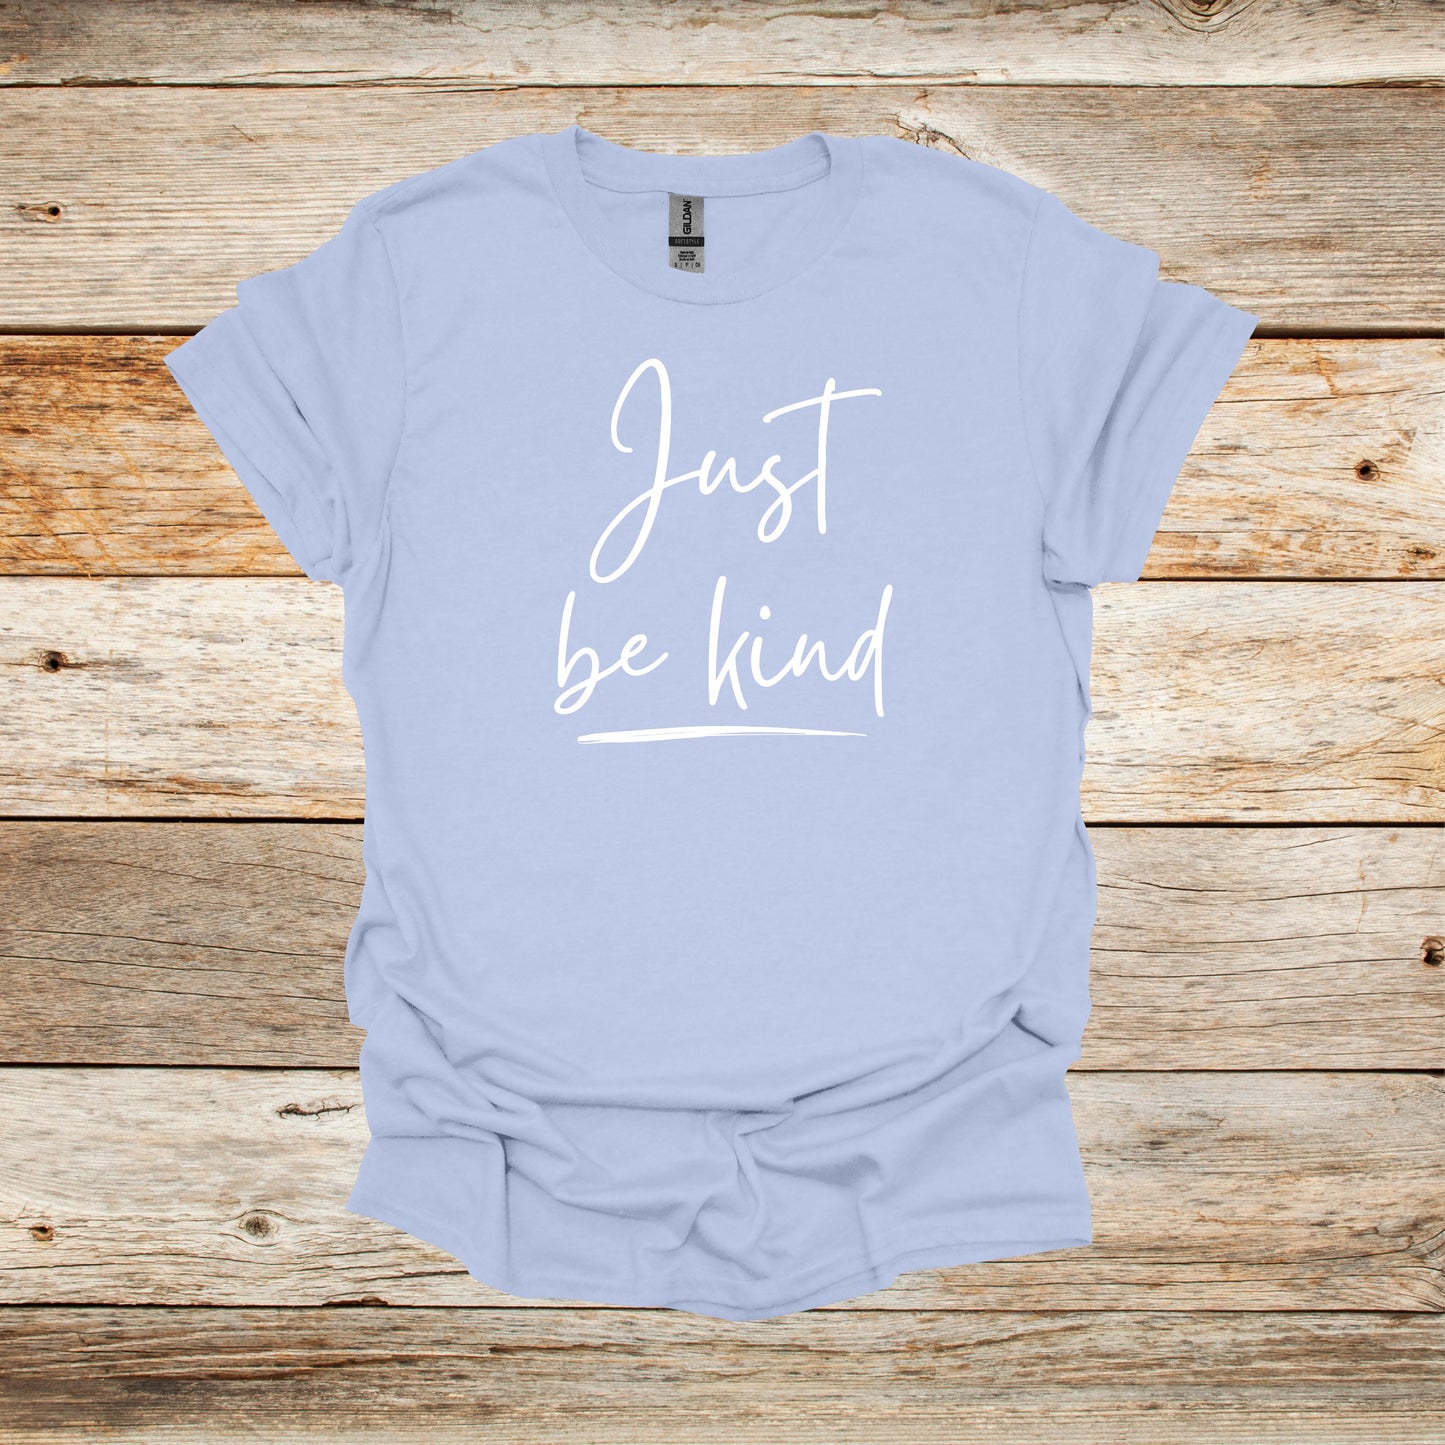 Sayings T-Shirt - Just Be Kind - Men's and Women's Tee Shirts - Sayings T-Shirts Graphic Avenue Light Blue Adult Small 